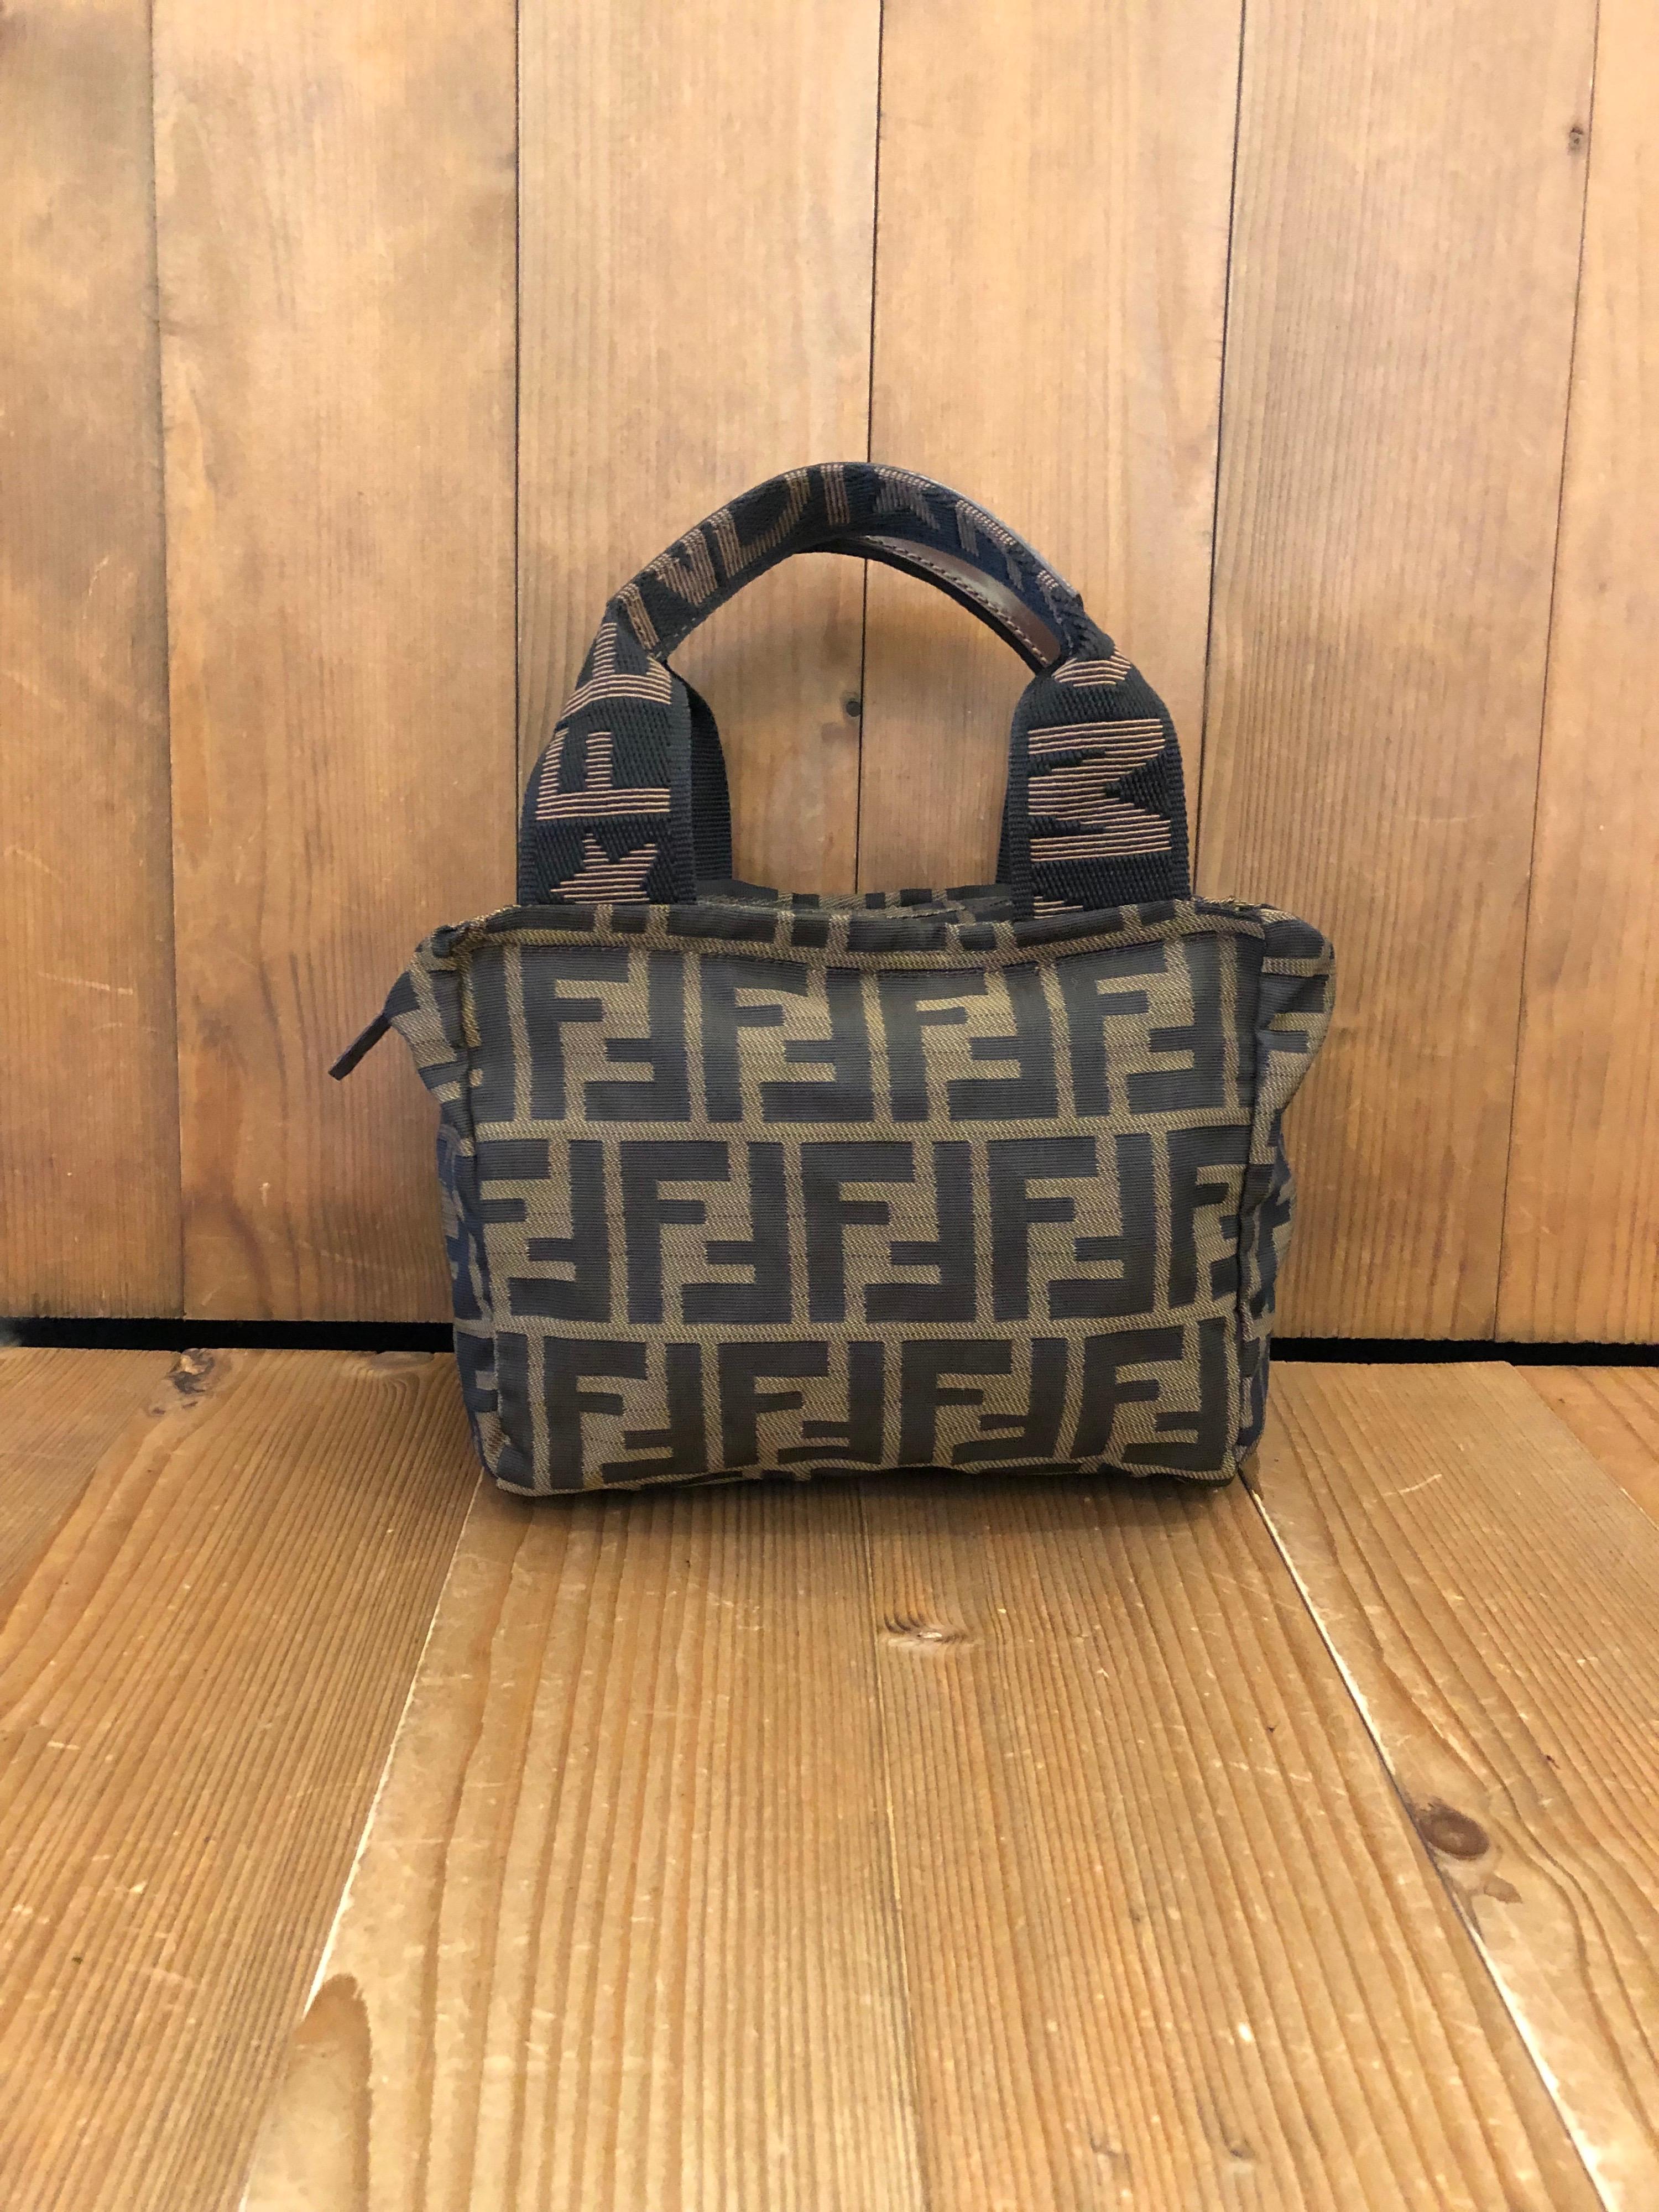 Vintage Fendi mini tote bag in Fendi's iconic zucca jacquard featuring leather trimmed handles. Made in Italy. Measures 7 x 5.75 x 3.5 inches Handle Drop 4 inches (fits plus-sized iPhone)

Condition: Minor signs of wear. Generally in good condition.